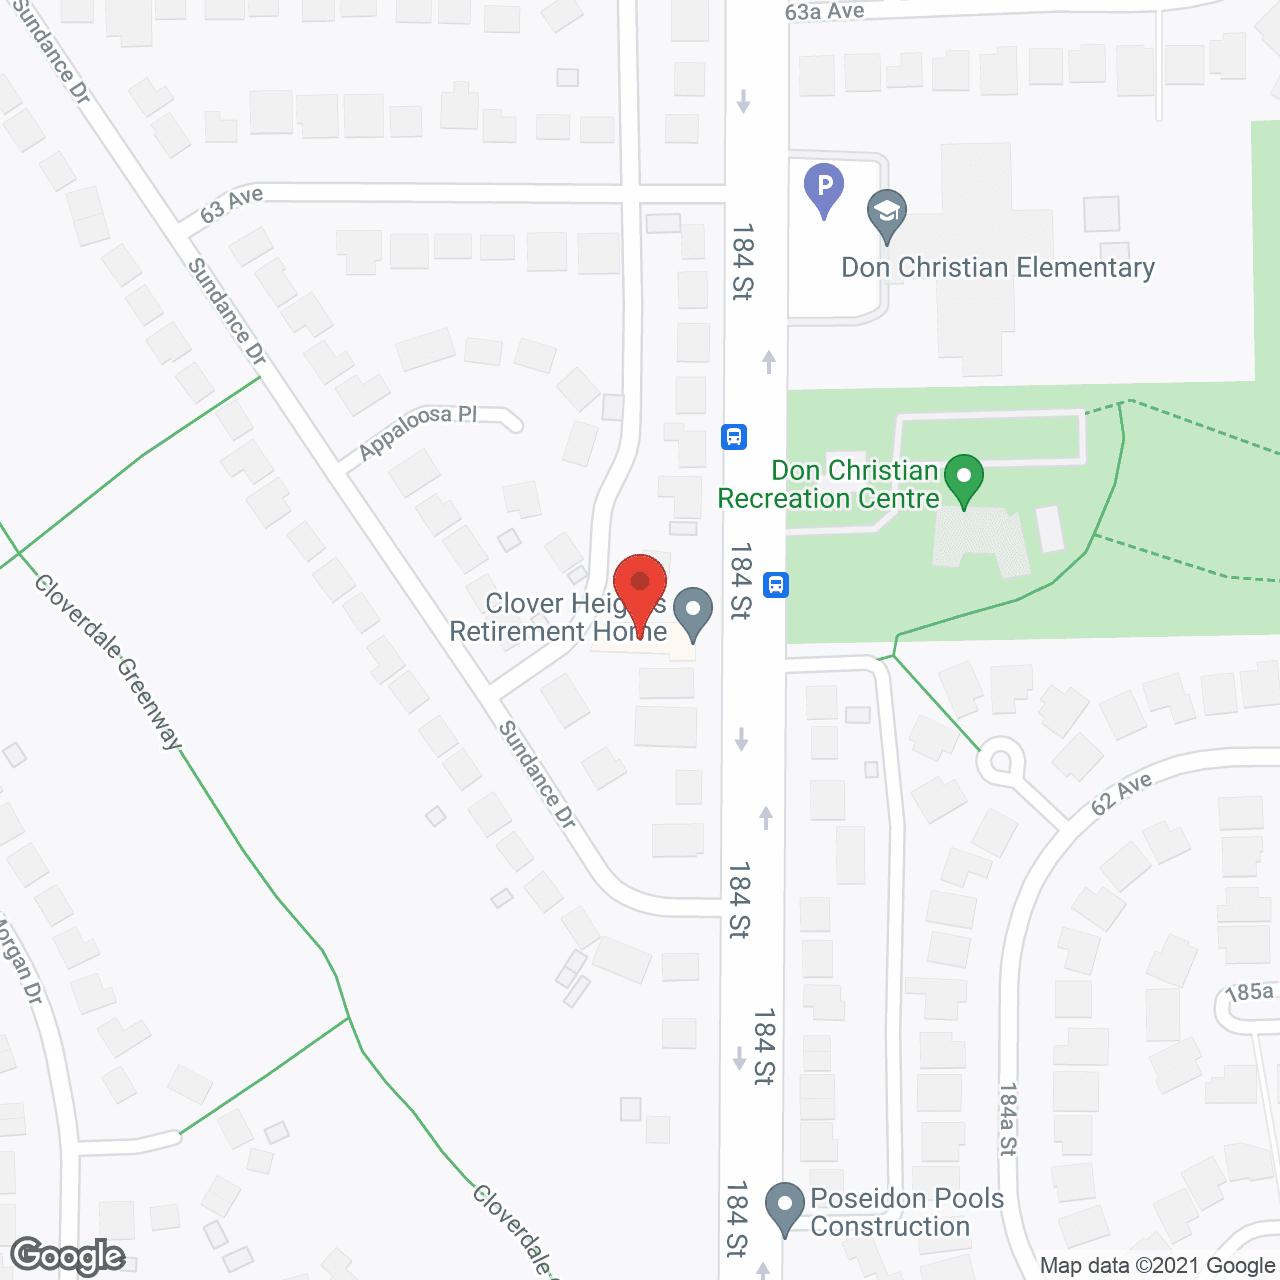 Clover Heights Retirement Home in google map